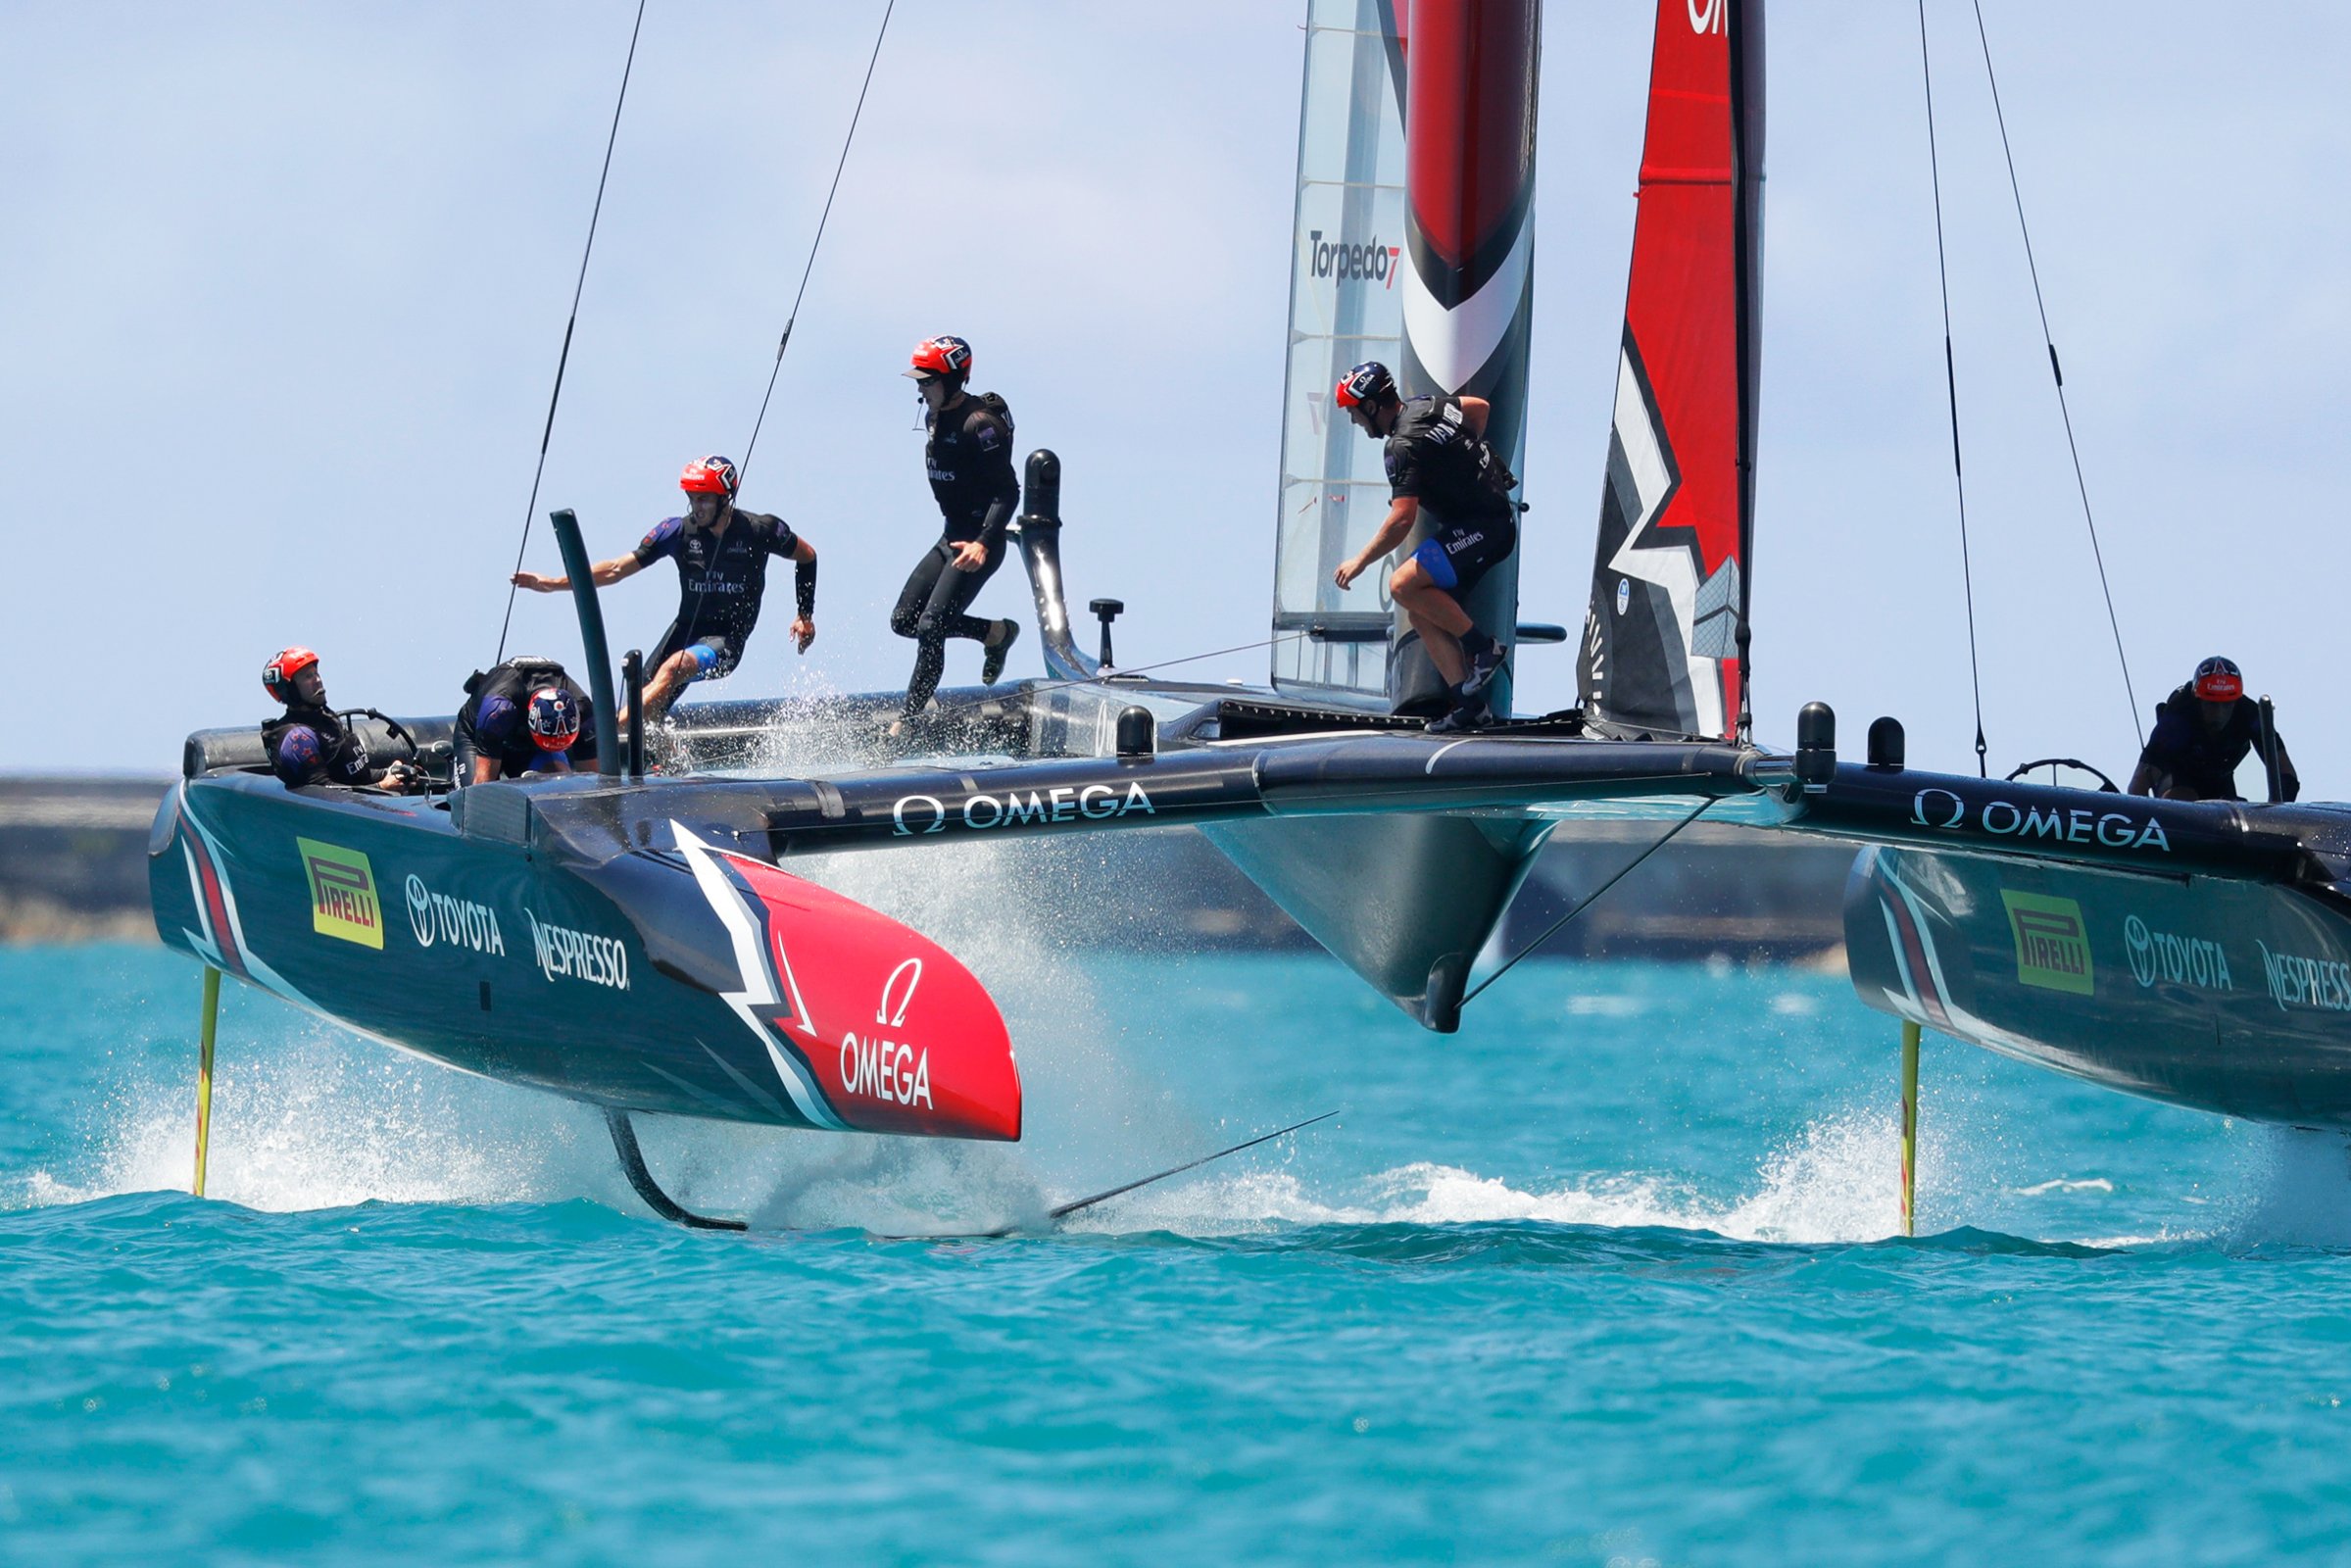 Emirates Team New Zealand, above, competes at the America’s Cup in Bermuda on June 25. New Zealand won its first Cup since 2000